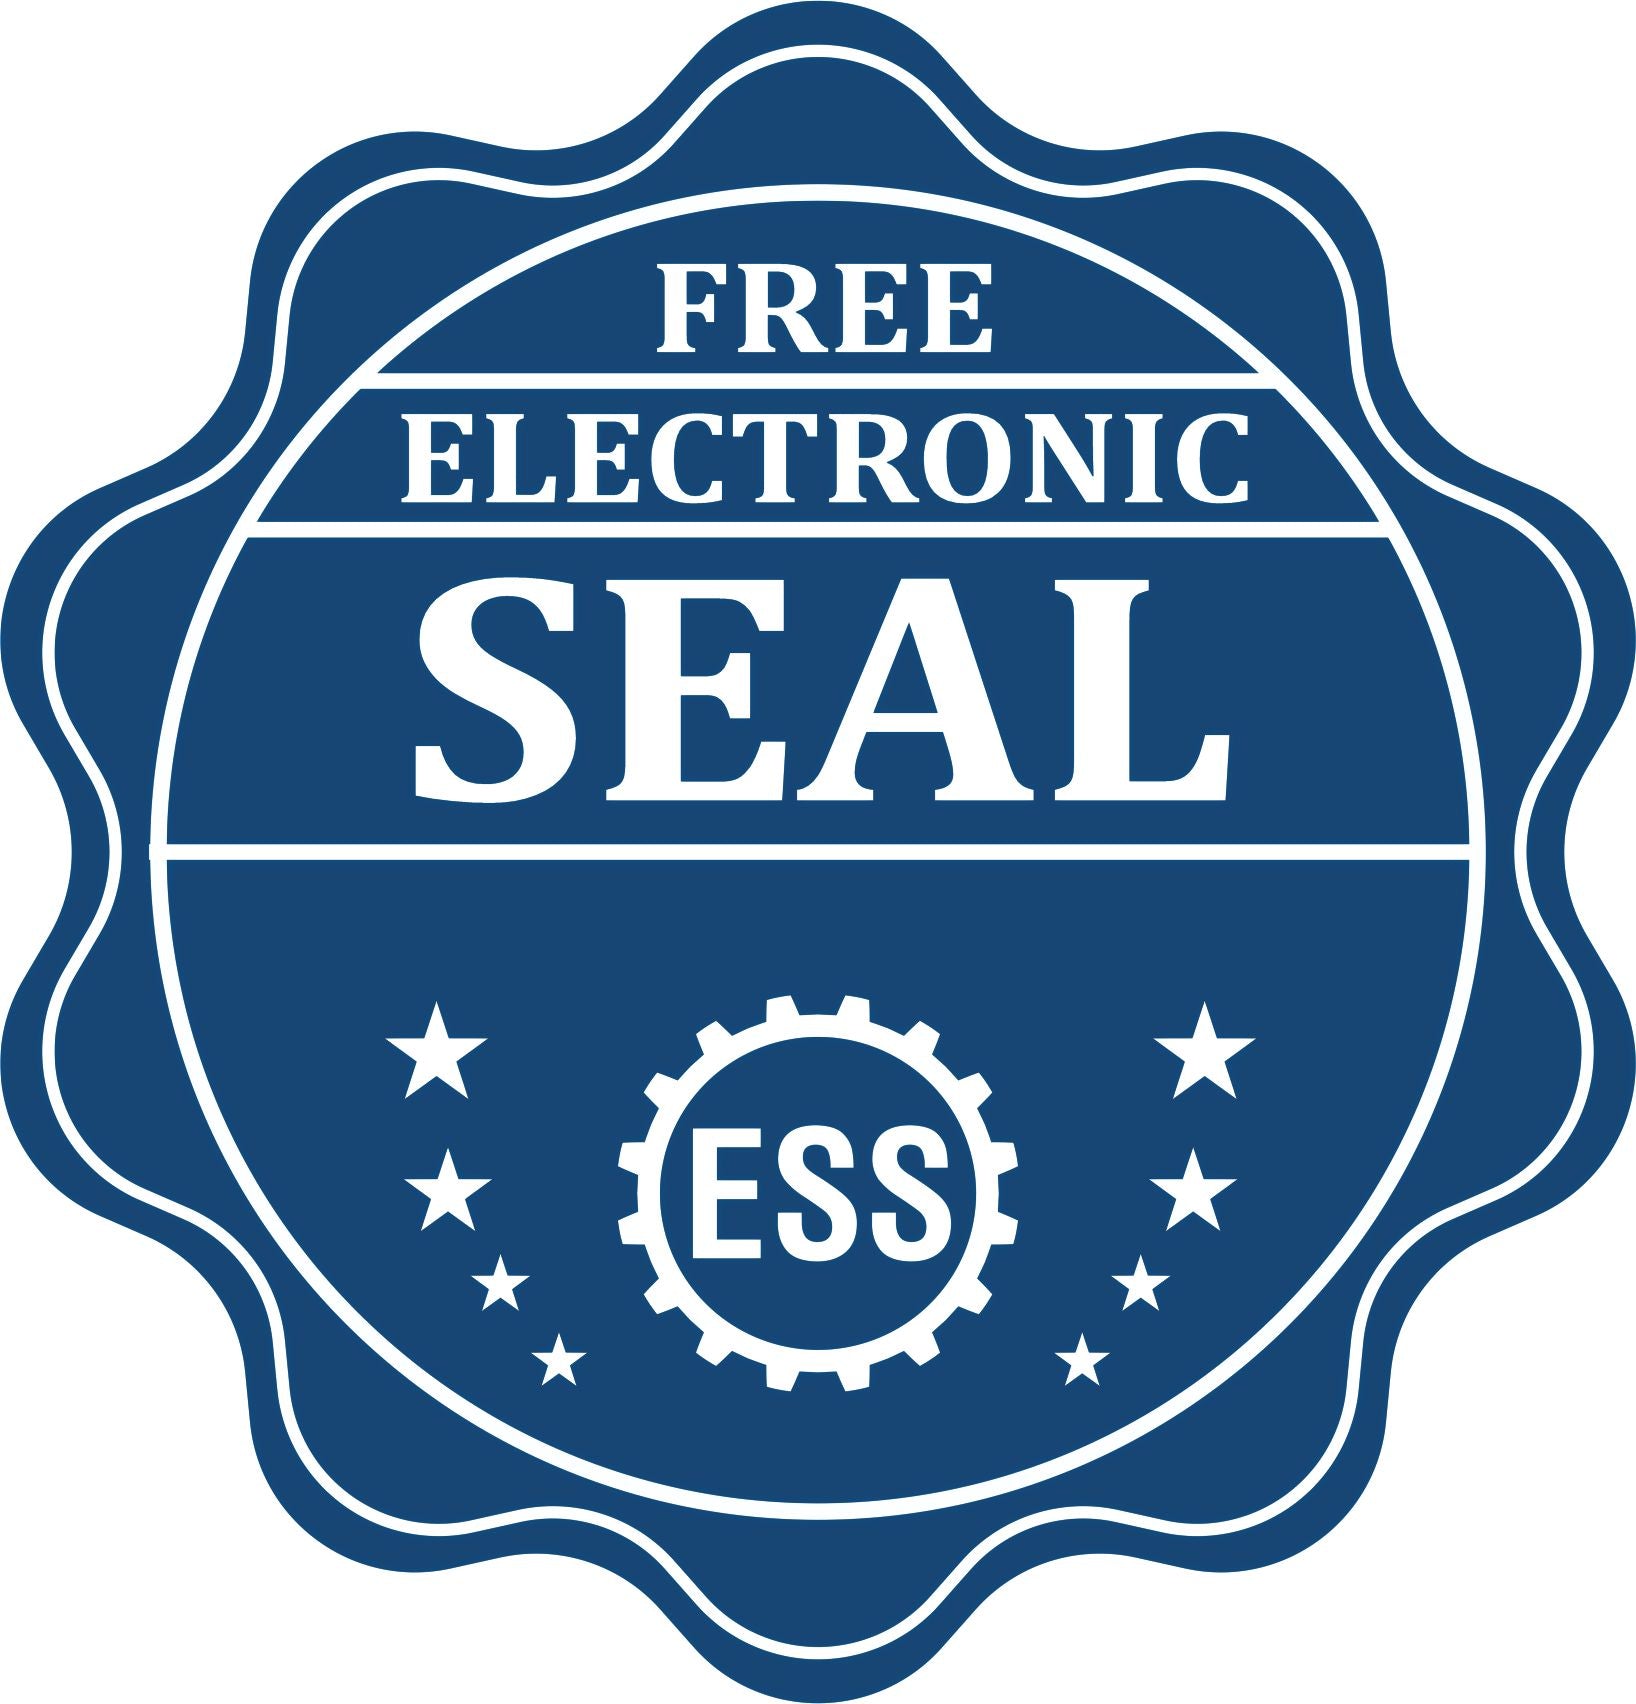 A badge showing a free electronic seal for the State of Massachusetts Extended Long Reach Geologist Seal with stars and the ESS gear on the emblem.